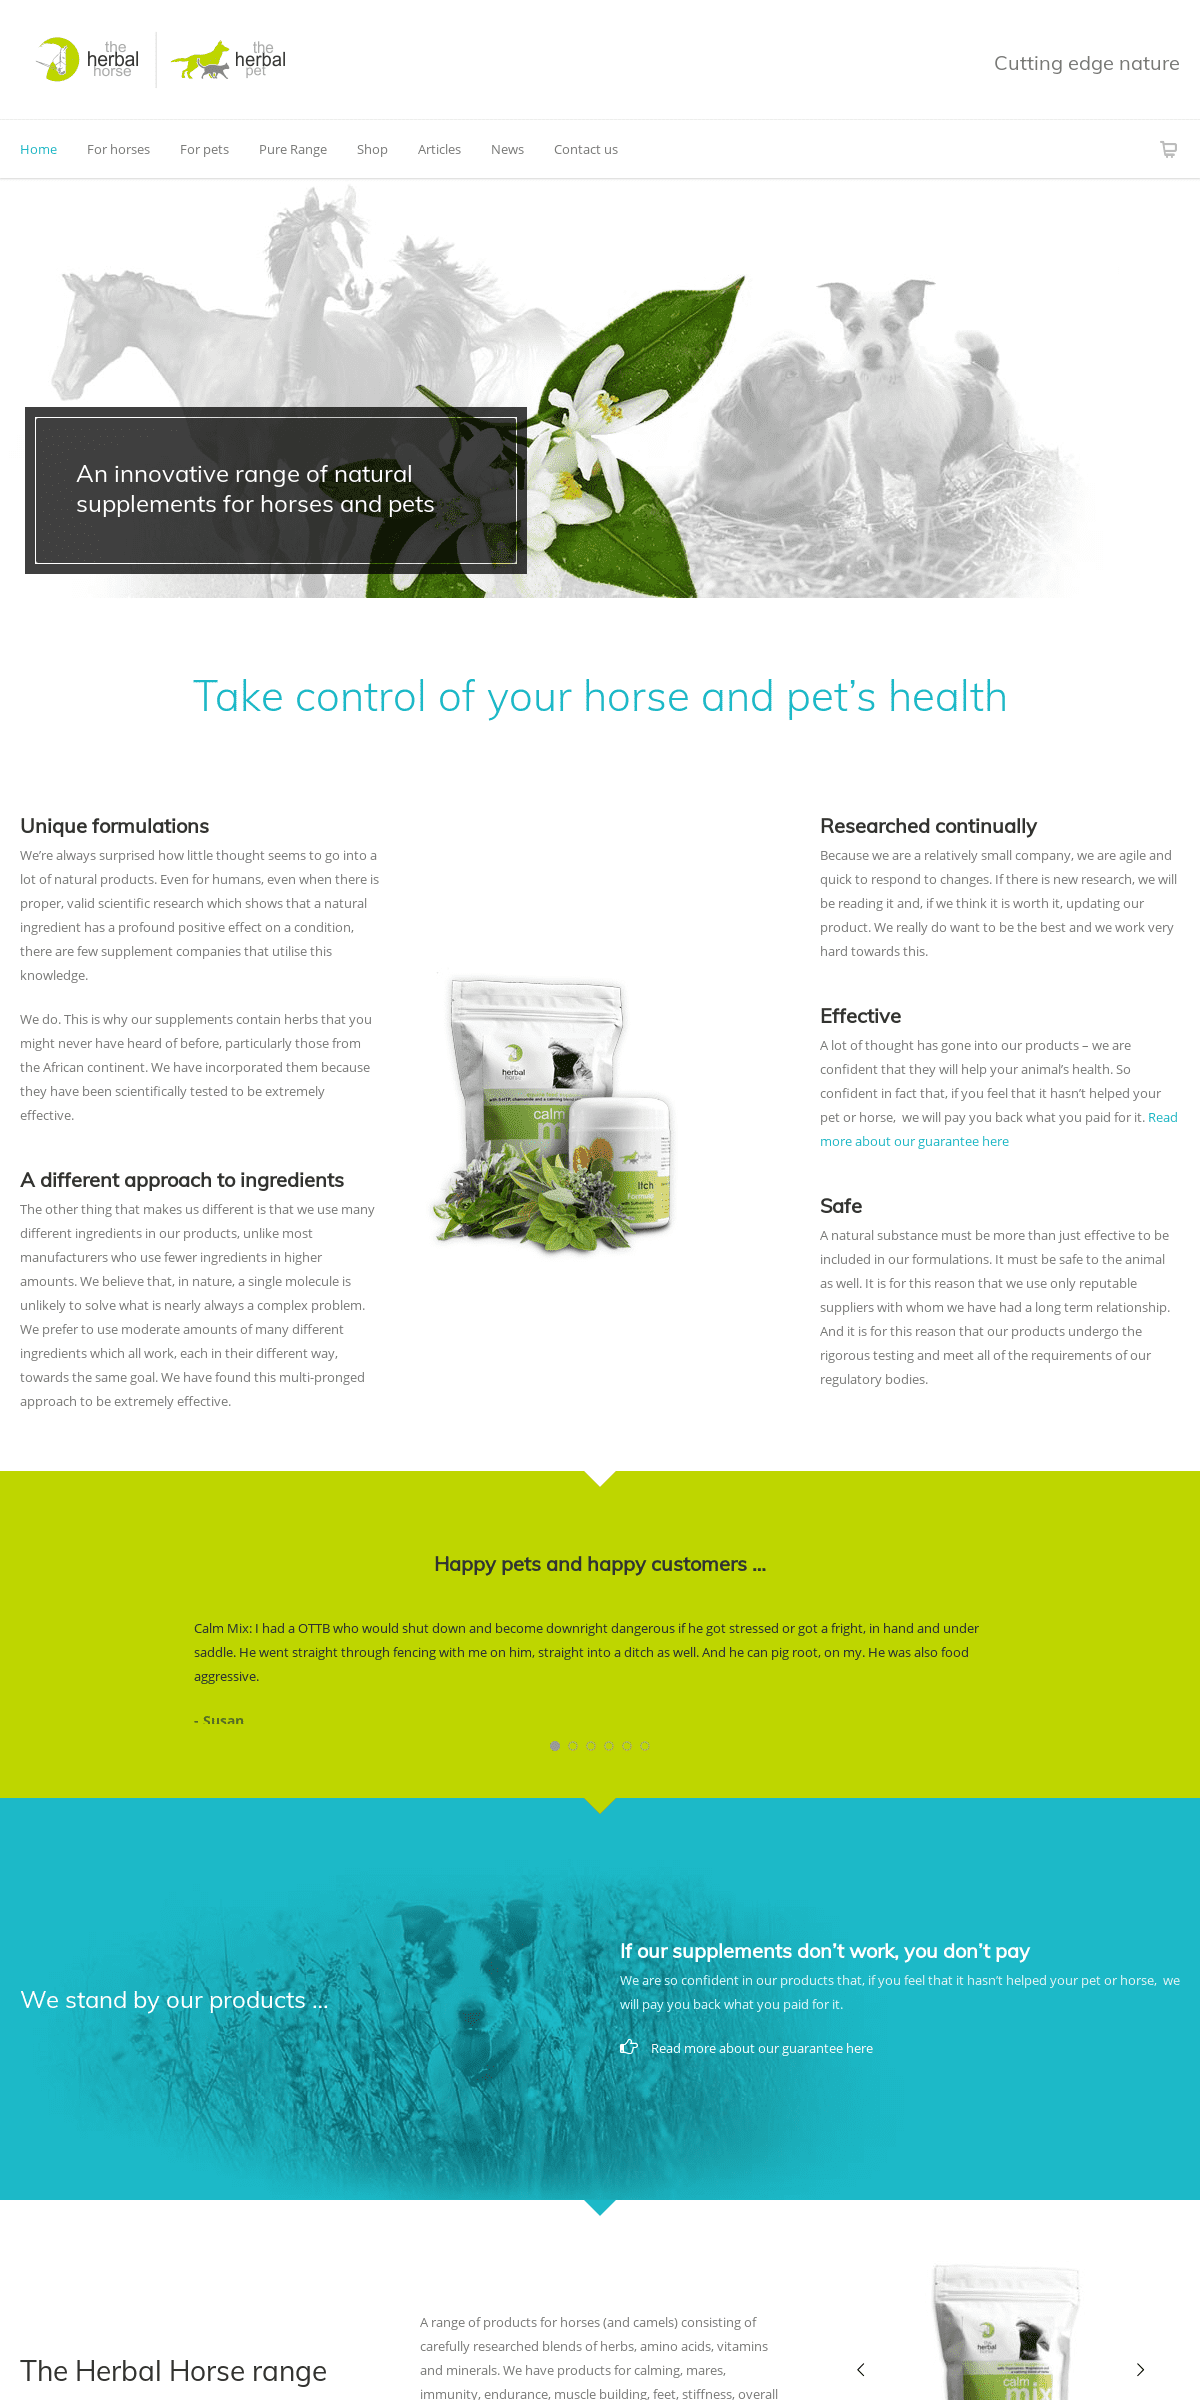 A complete backup of theherbalhorse.com